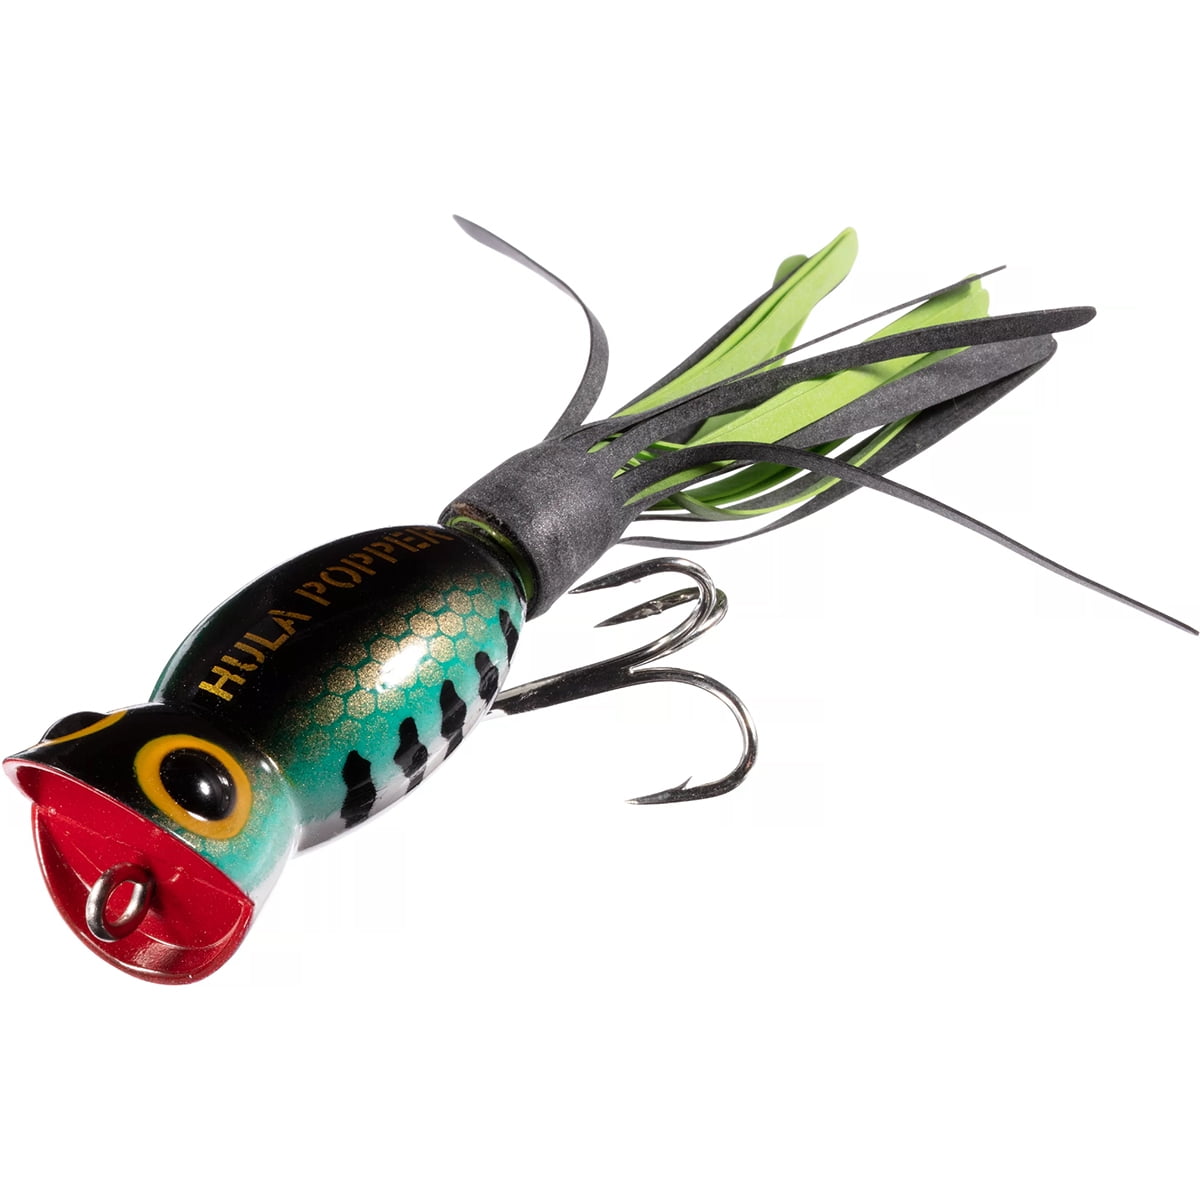 Buy Fishing Lures Making Kit DIY Spinner Bait Making Kit Buzzbait  Spinnerbait Fishing Spoon Rig Colorado Spinner Blade Plier Clevis Treble  Hooks Make Your Own Fishing Lures for Bass Trout Walleye Online